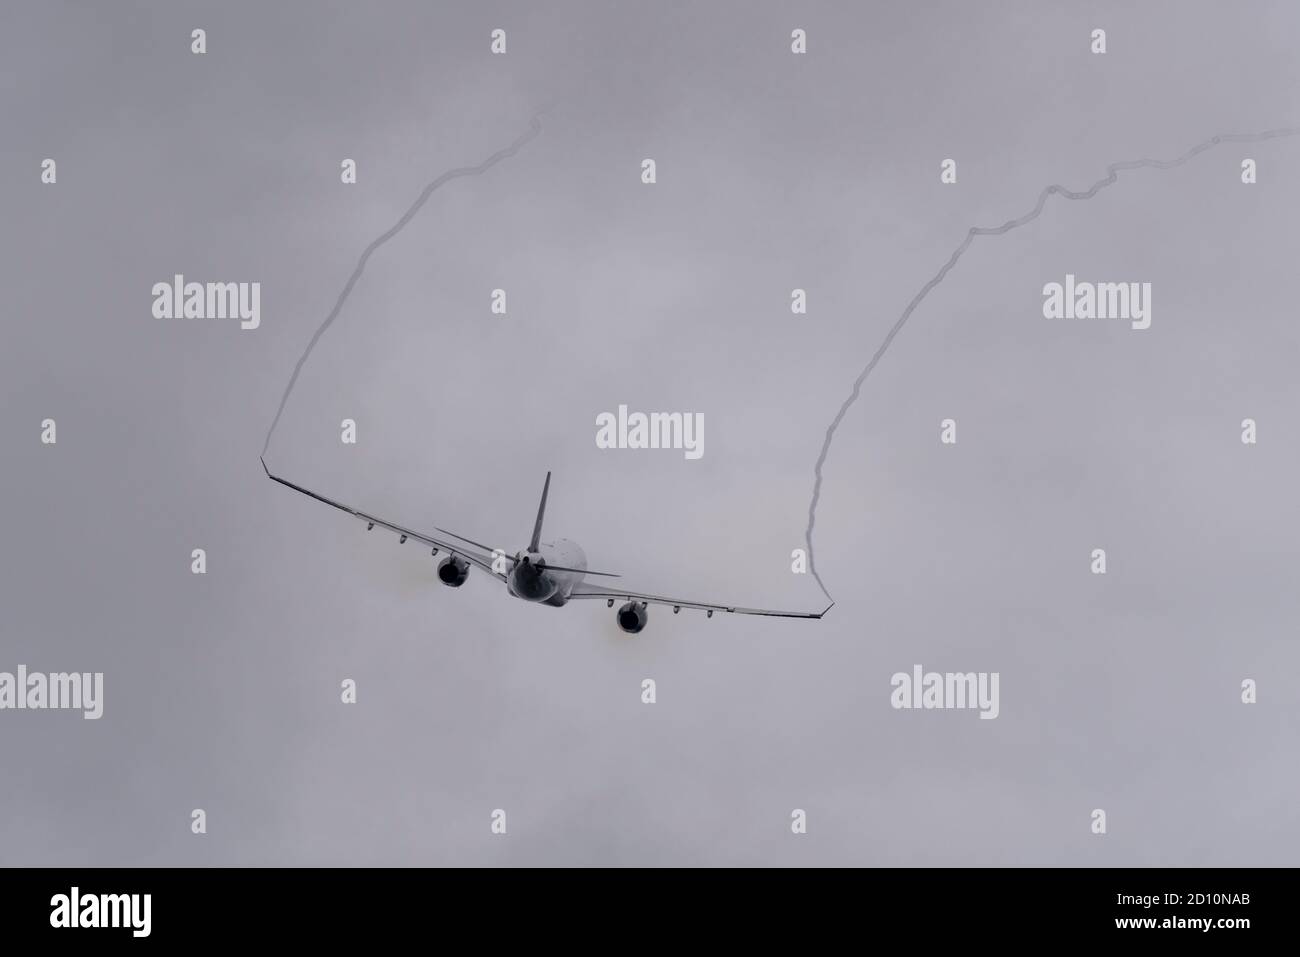 Jet airliner plane taking off in bad weather from London Heathrow Airport, UK, climbing into heavy clouds leaving streamers of vortices Stock Photo